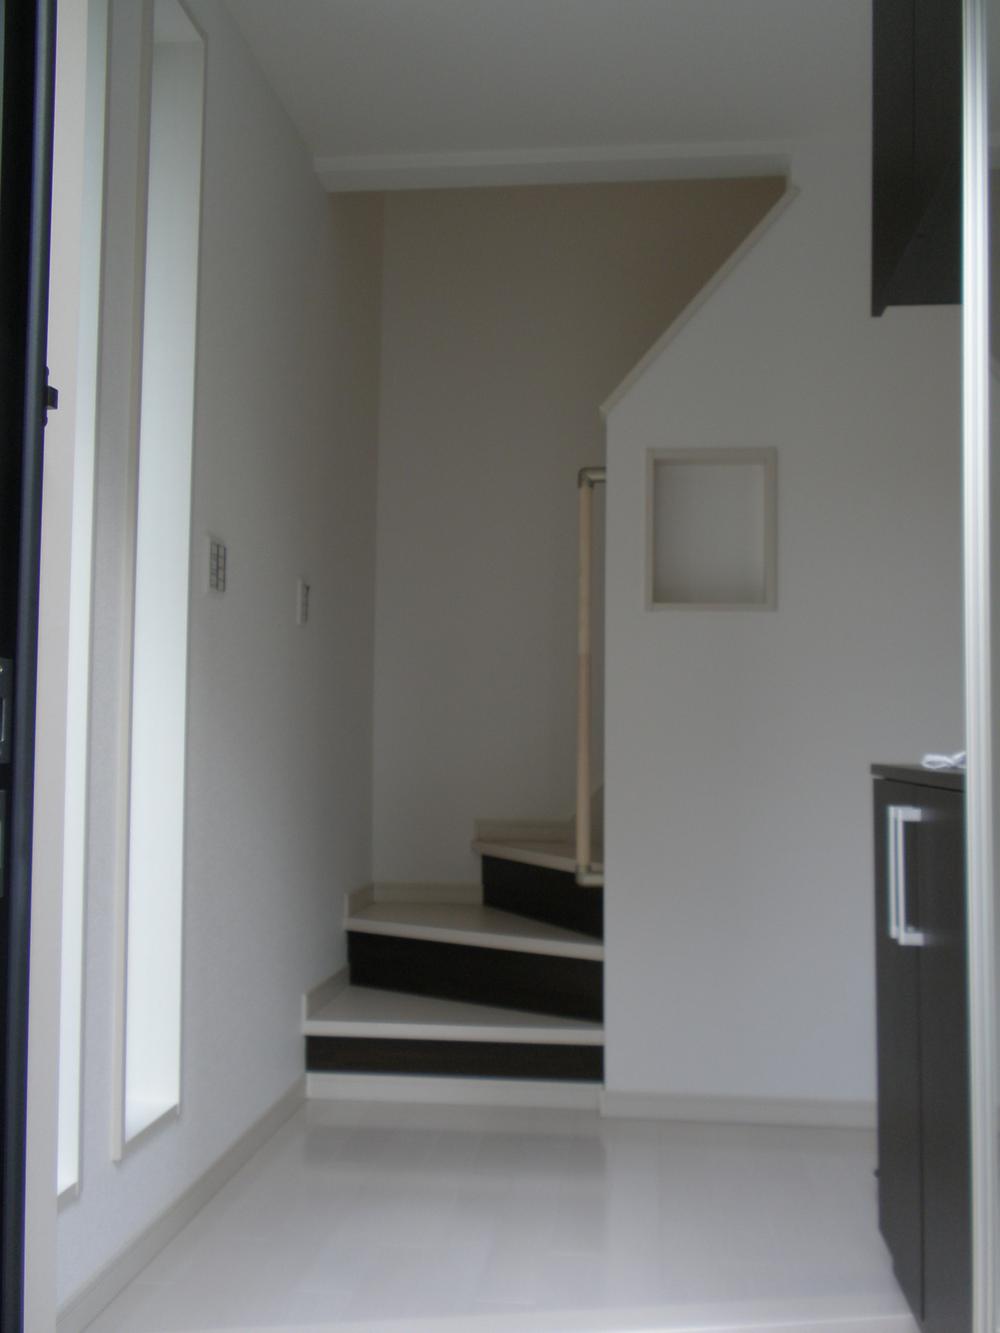 Same specifications photos (Other introspection). Example of construction of entrance hall part